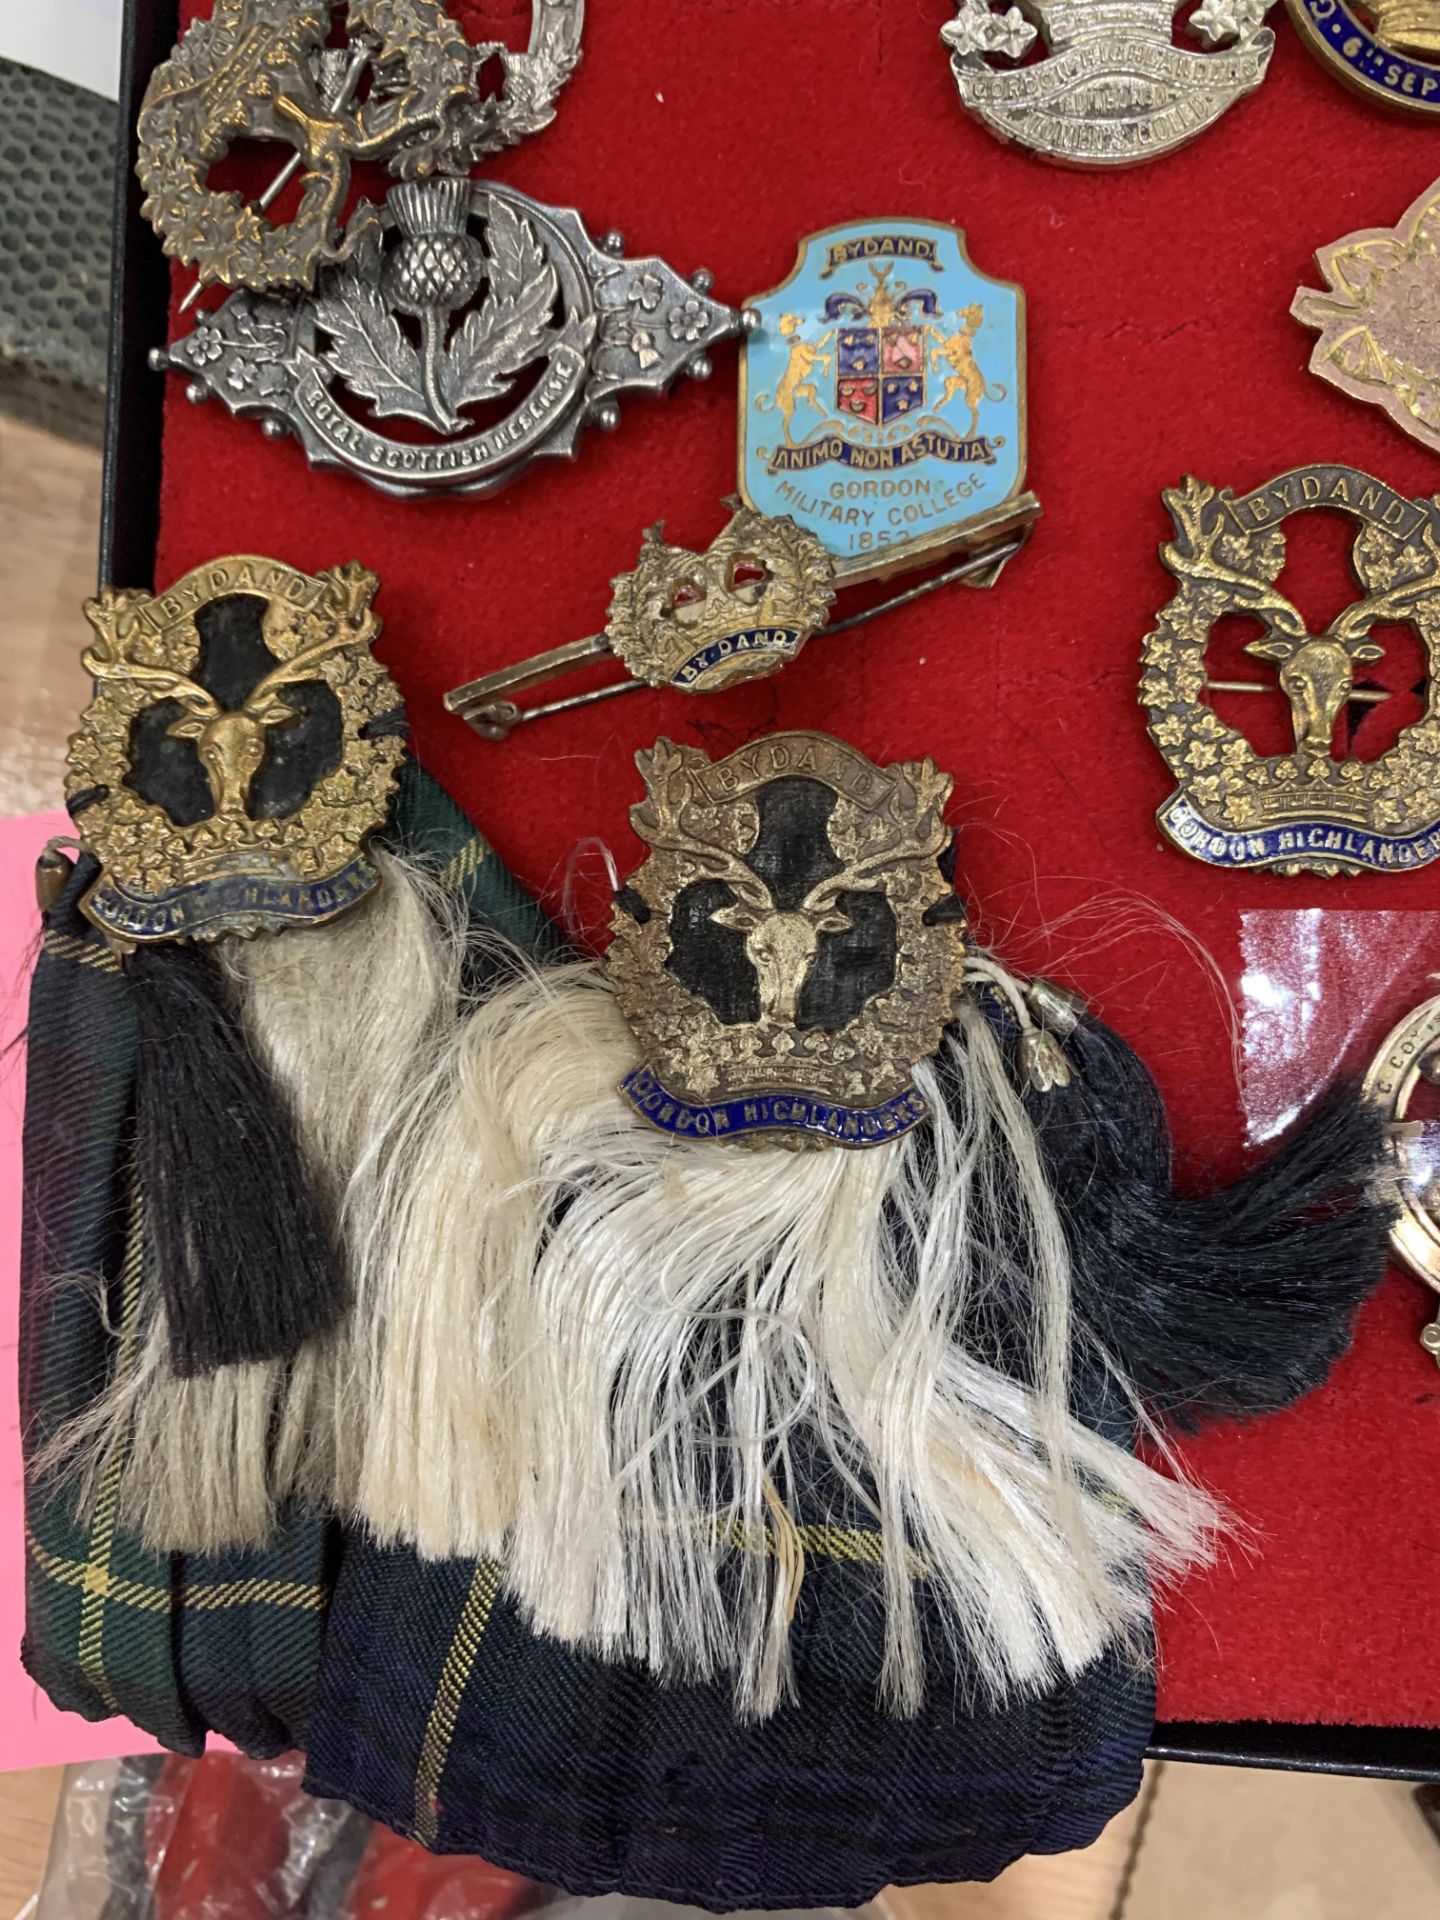 A QUANTITY OF SWEETHEART BROOCHES, FOR GORDON HIGHLANDERS - Image 5 of 7